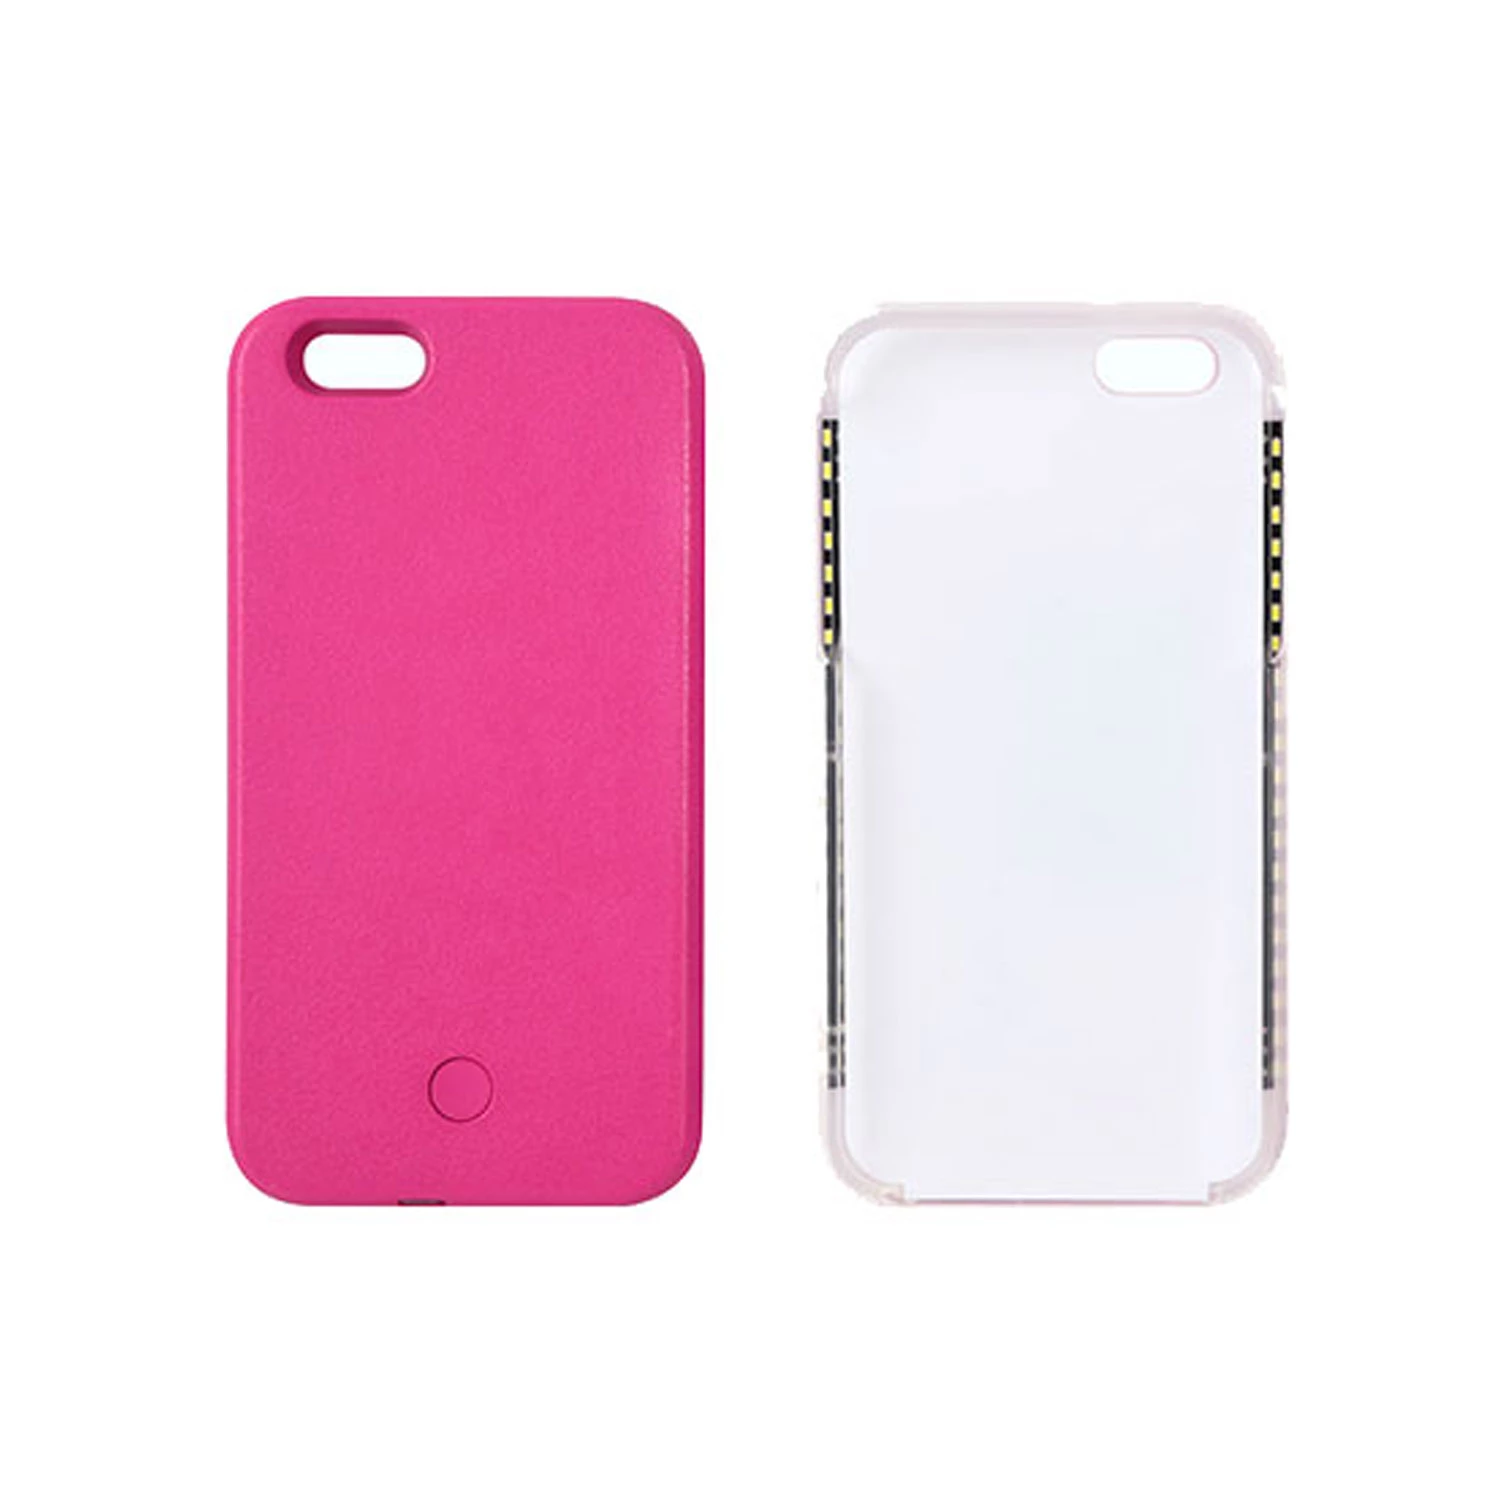 LED Light-Up Phone Case Cover For iPhone 6 Plus 6S Plus